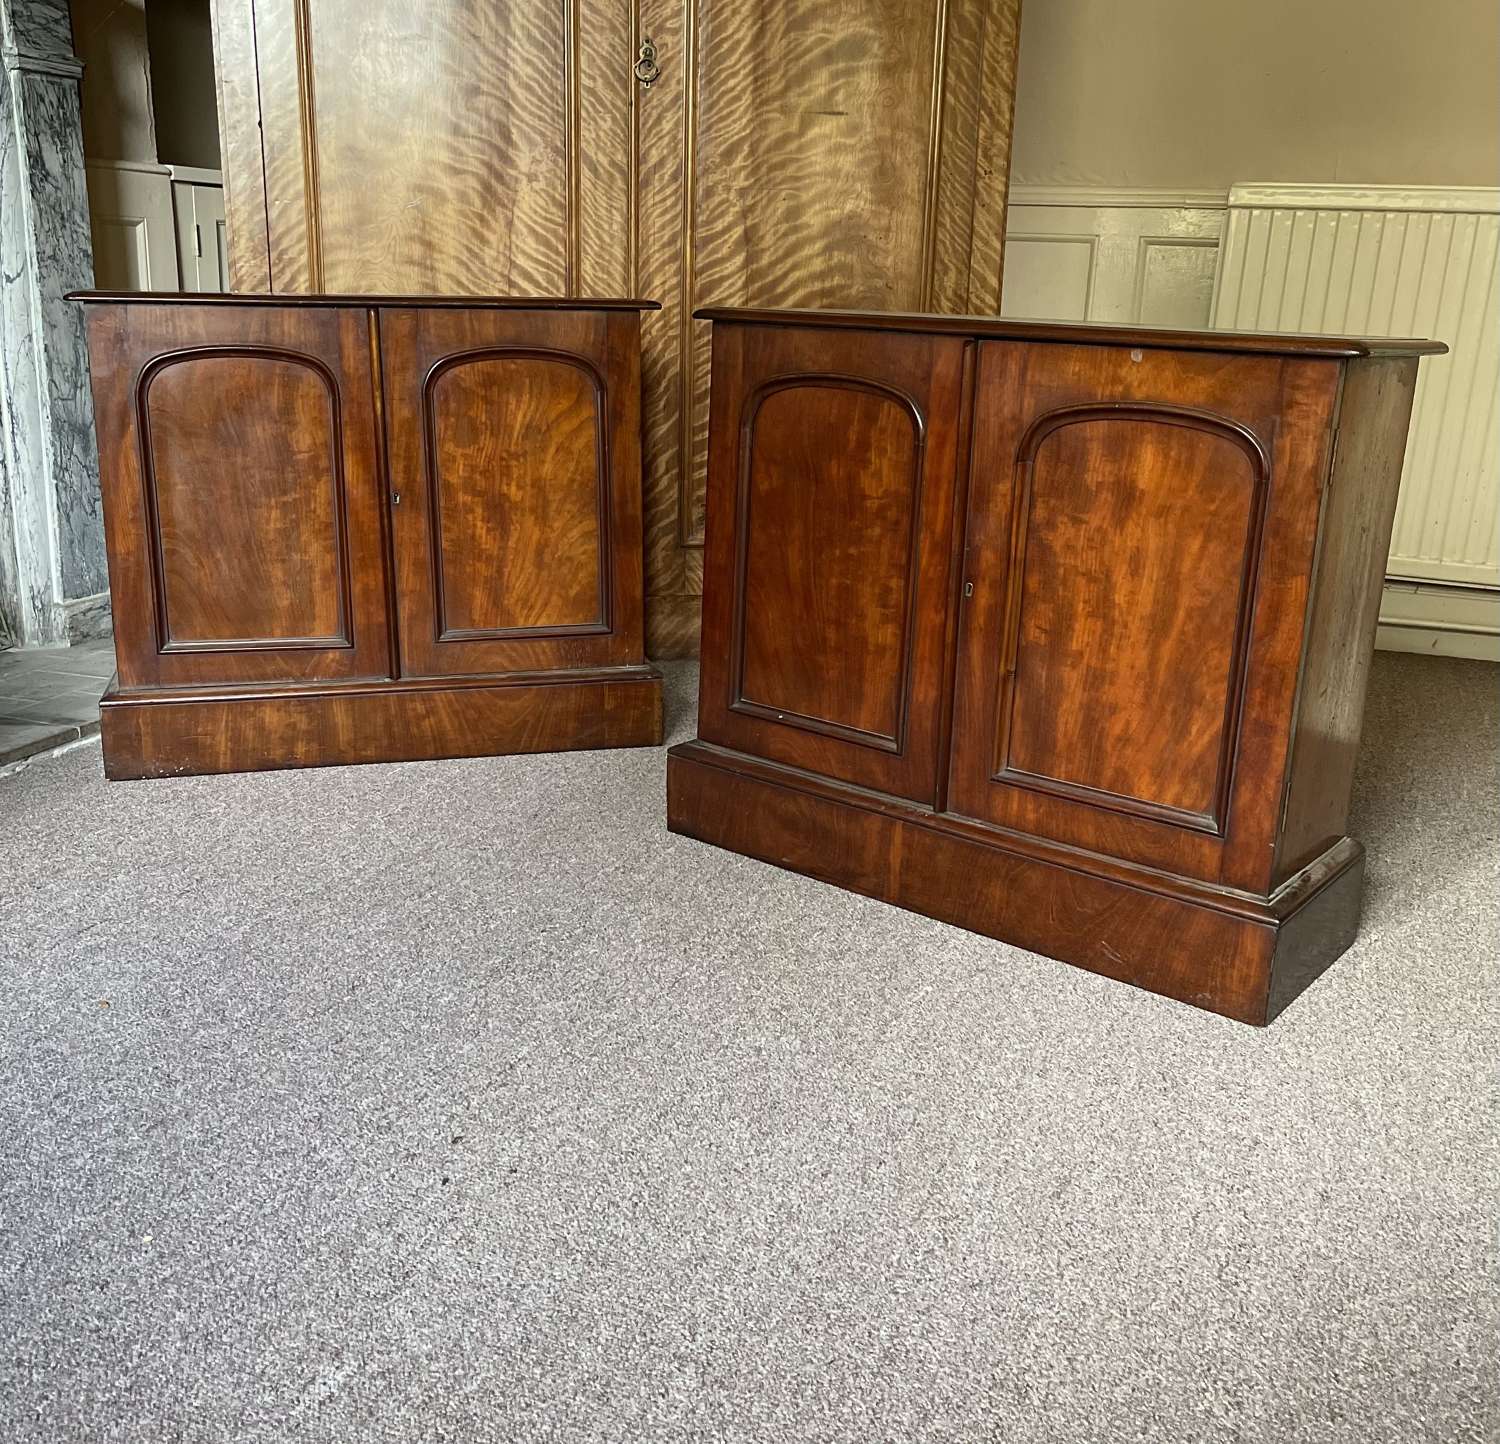 A pair of 19th century cupboards